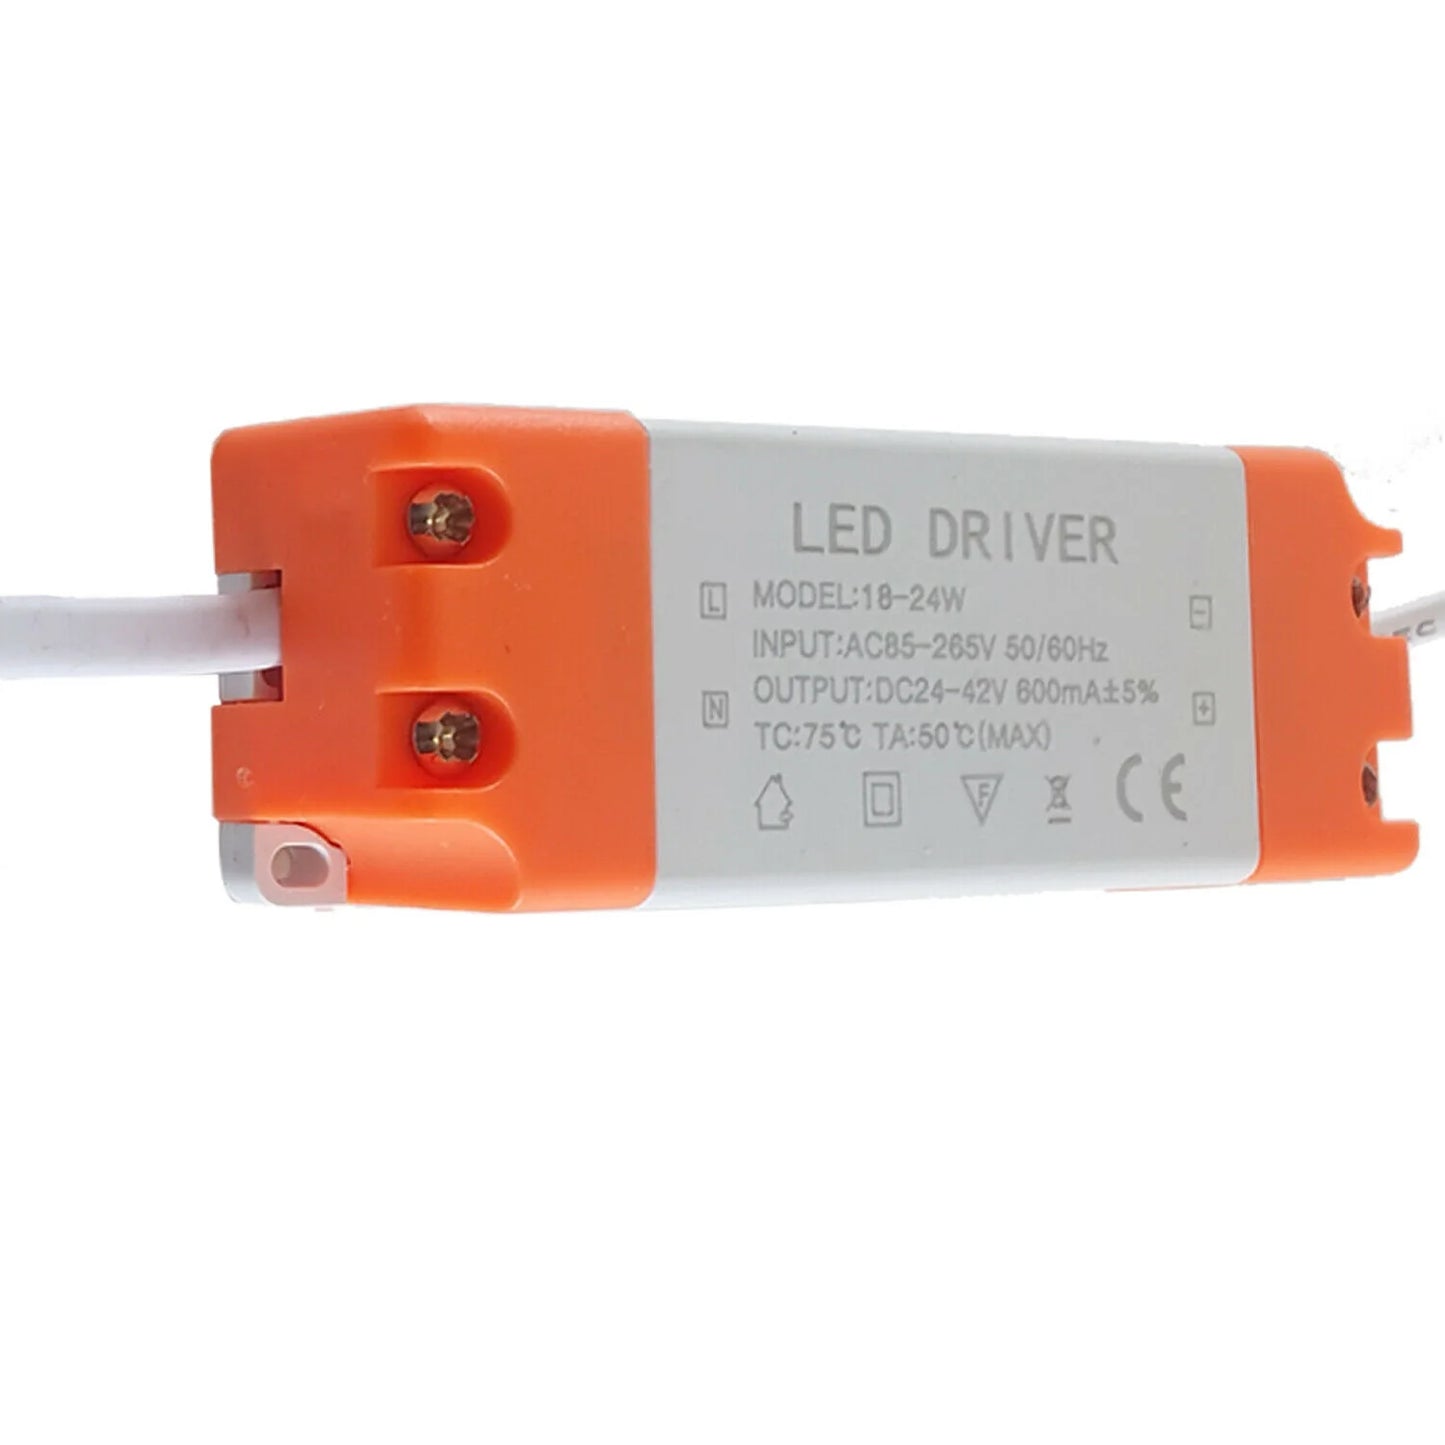 LED Driver DC 24-42V 600mAmp Constant Current Power Supply